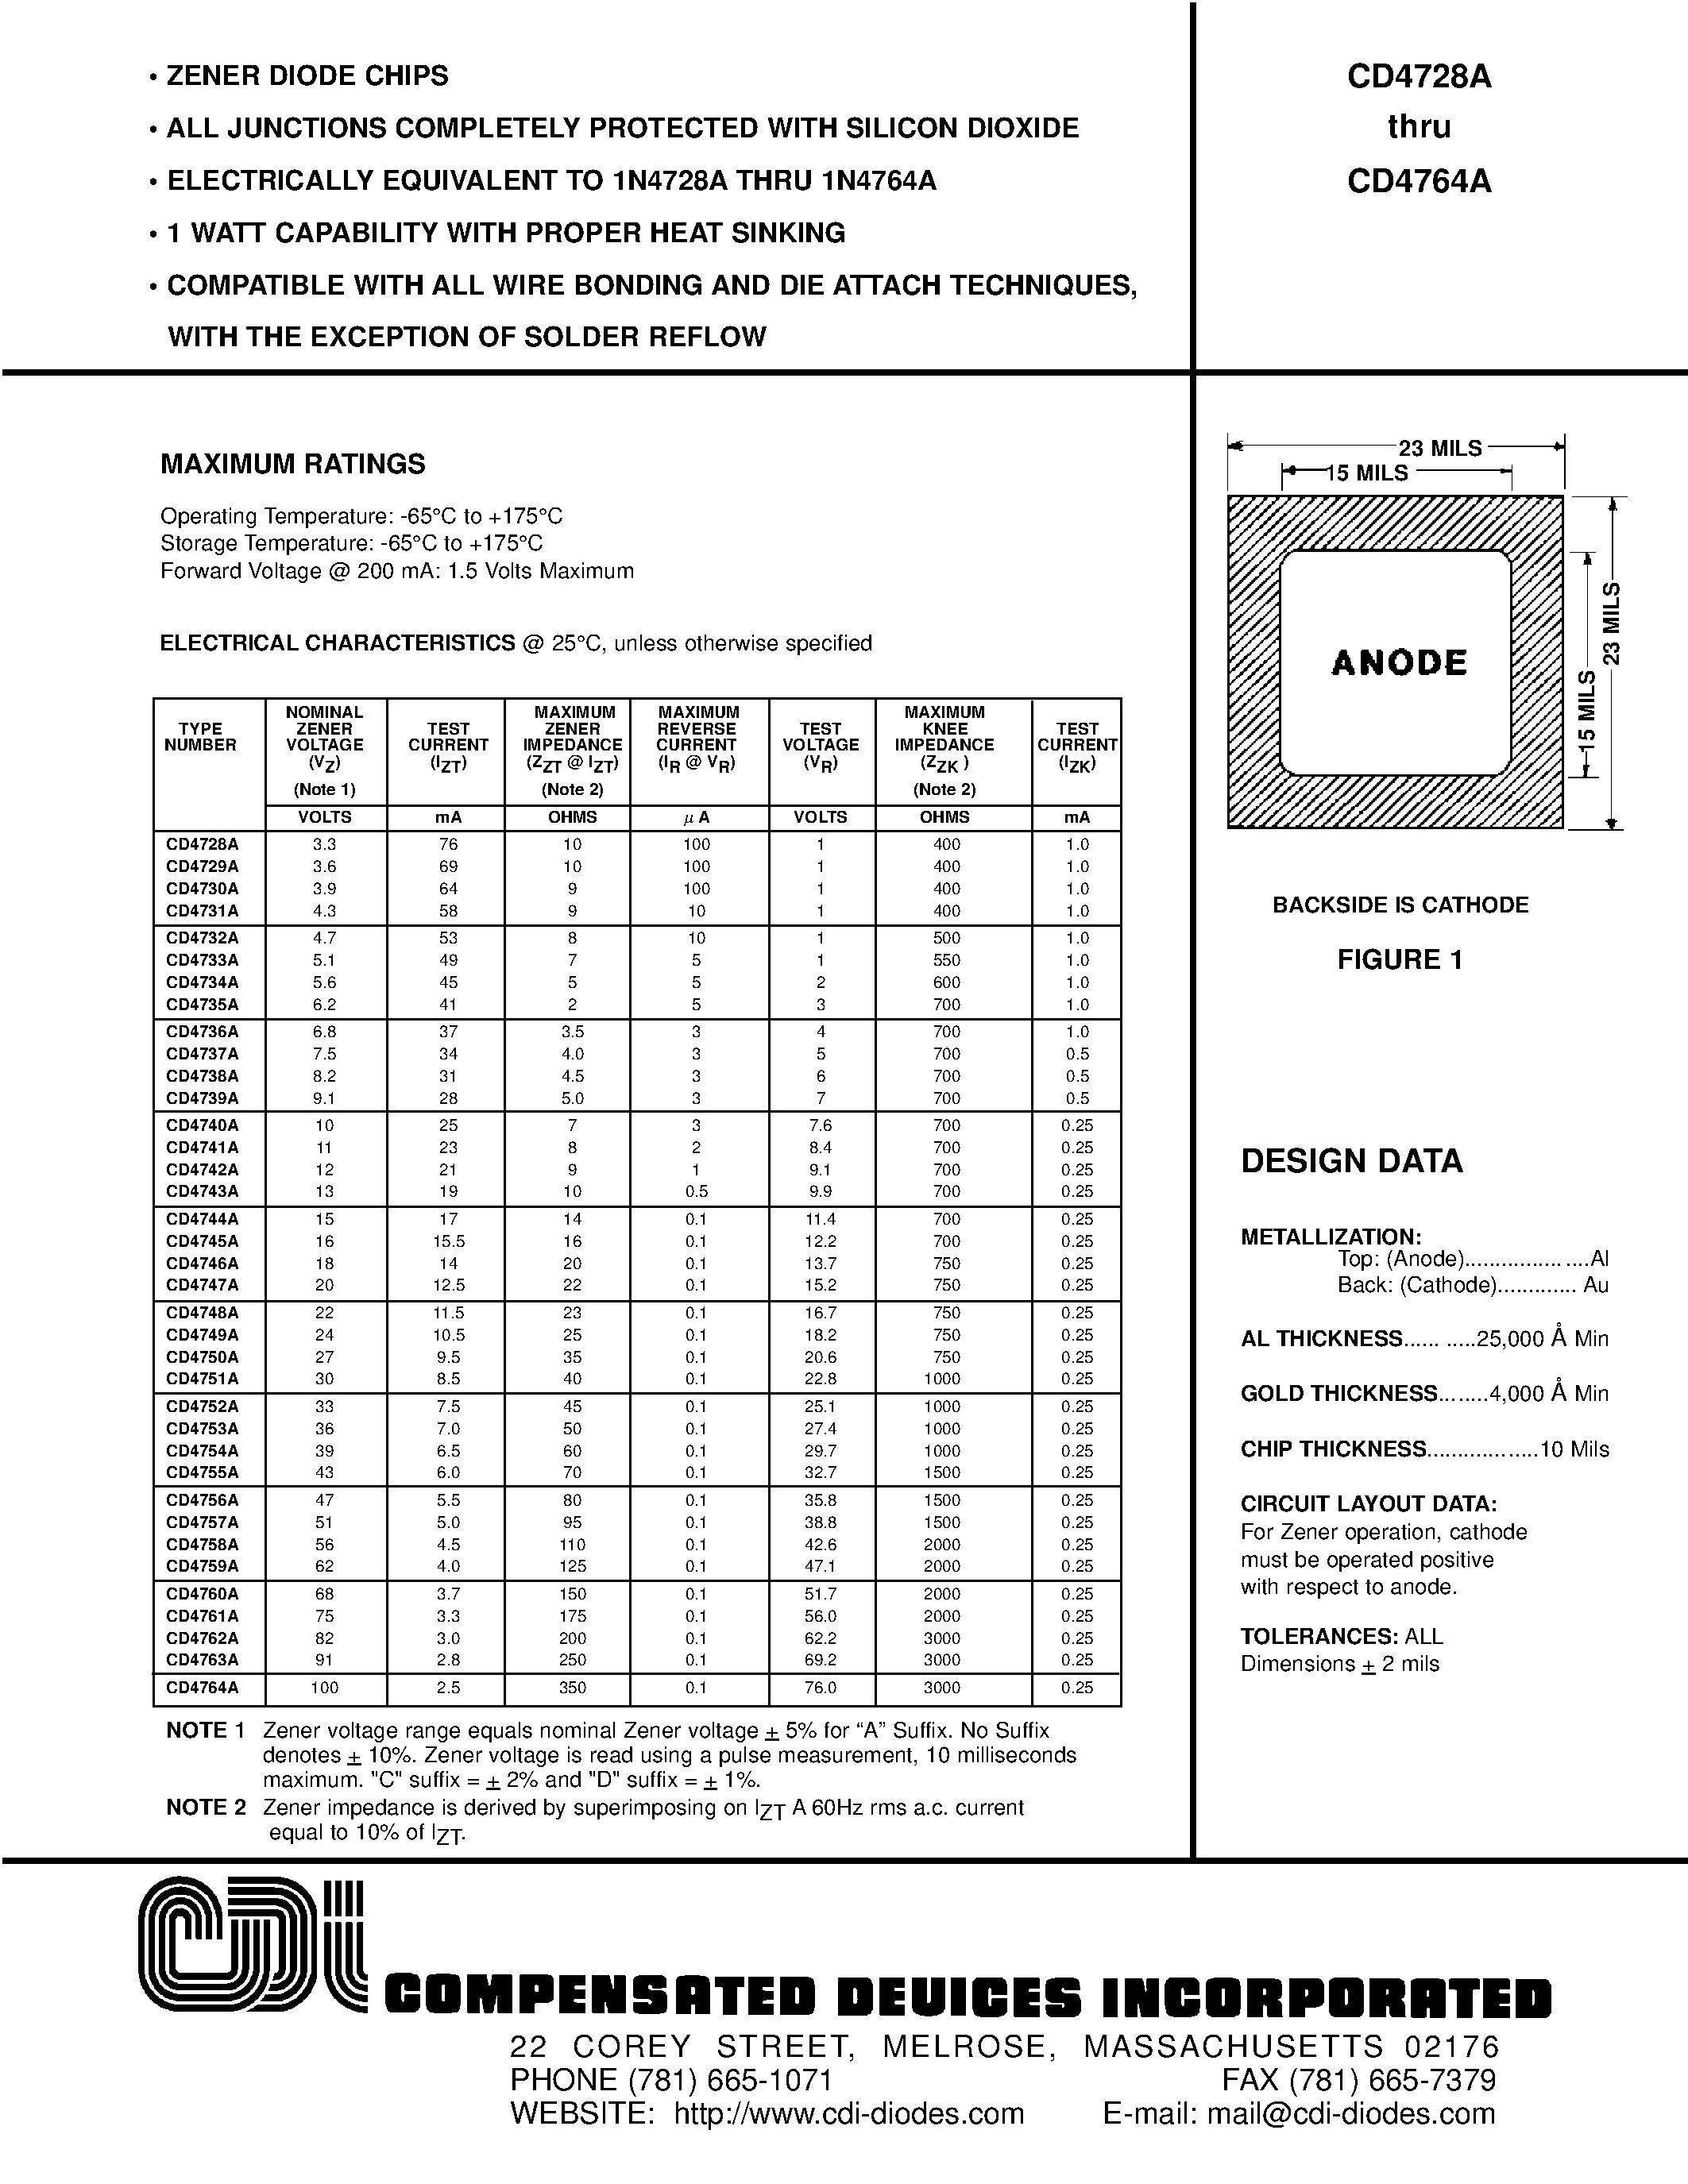 Datasheet CD4761A - ZENER DIODE CHIPS page 1